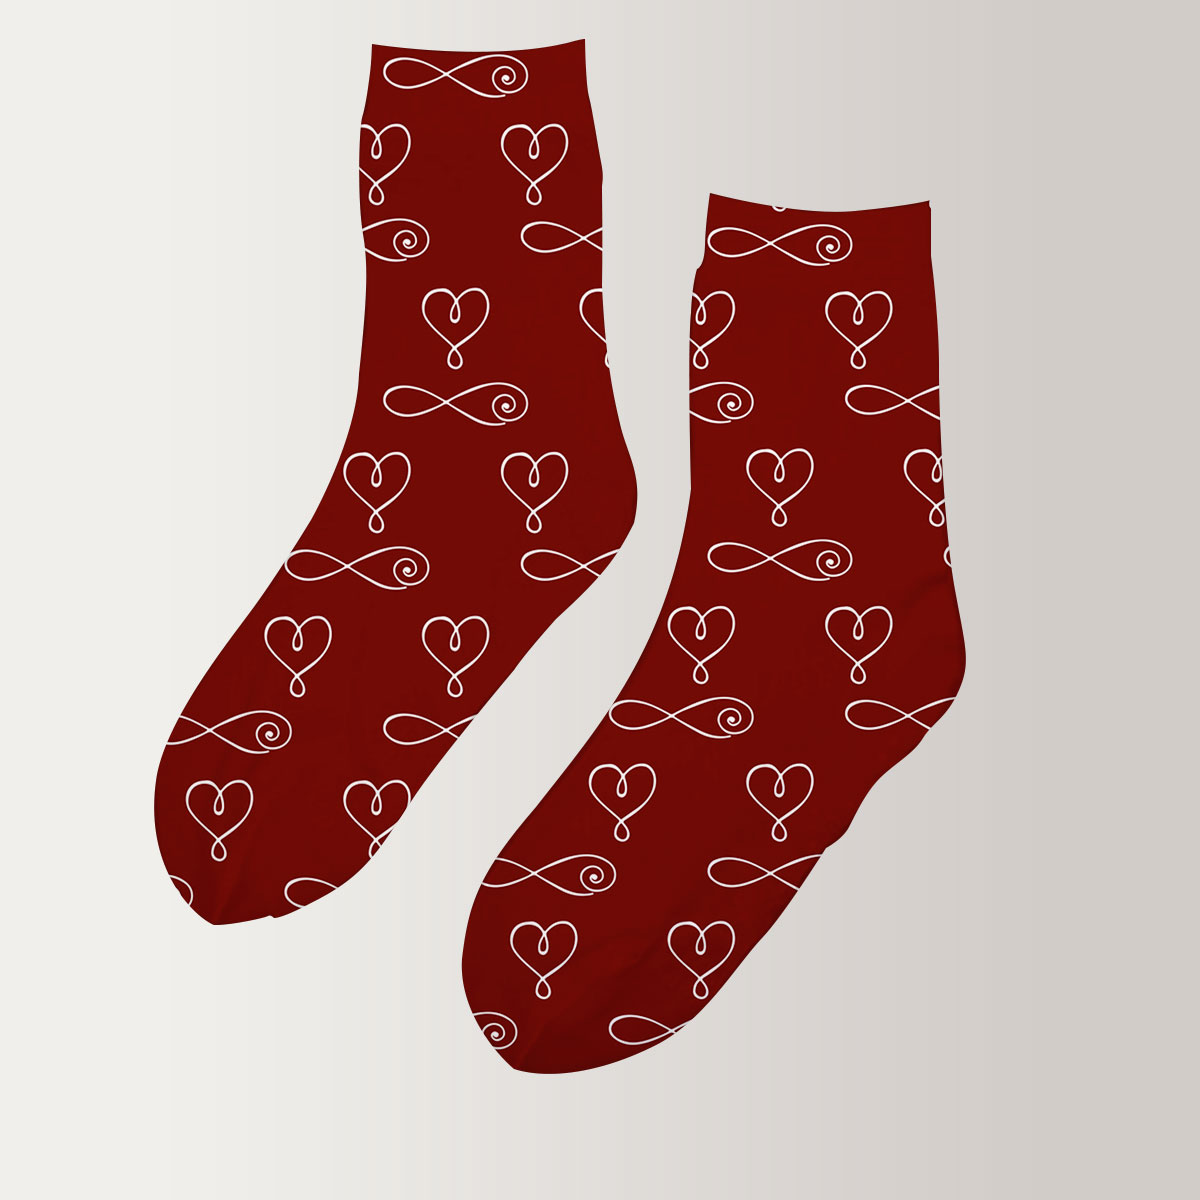 Bohemian With Hearts And Signs Of Infinity 3D Socks